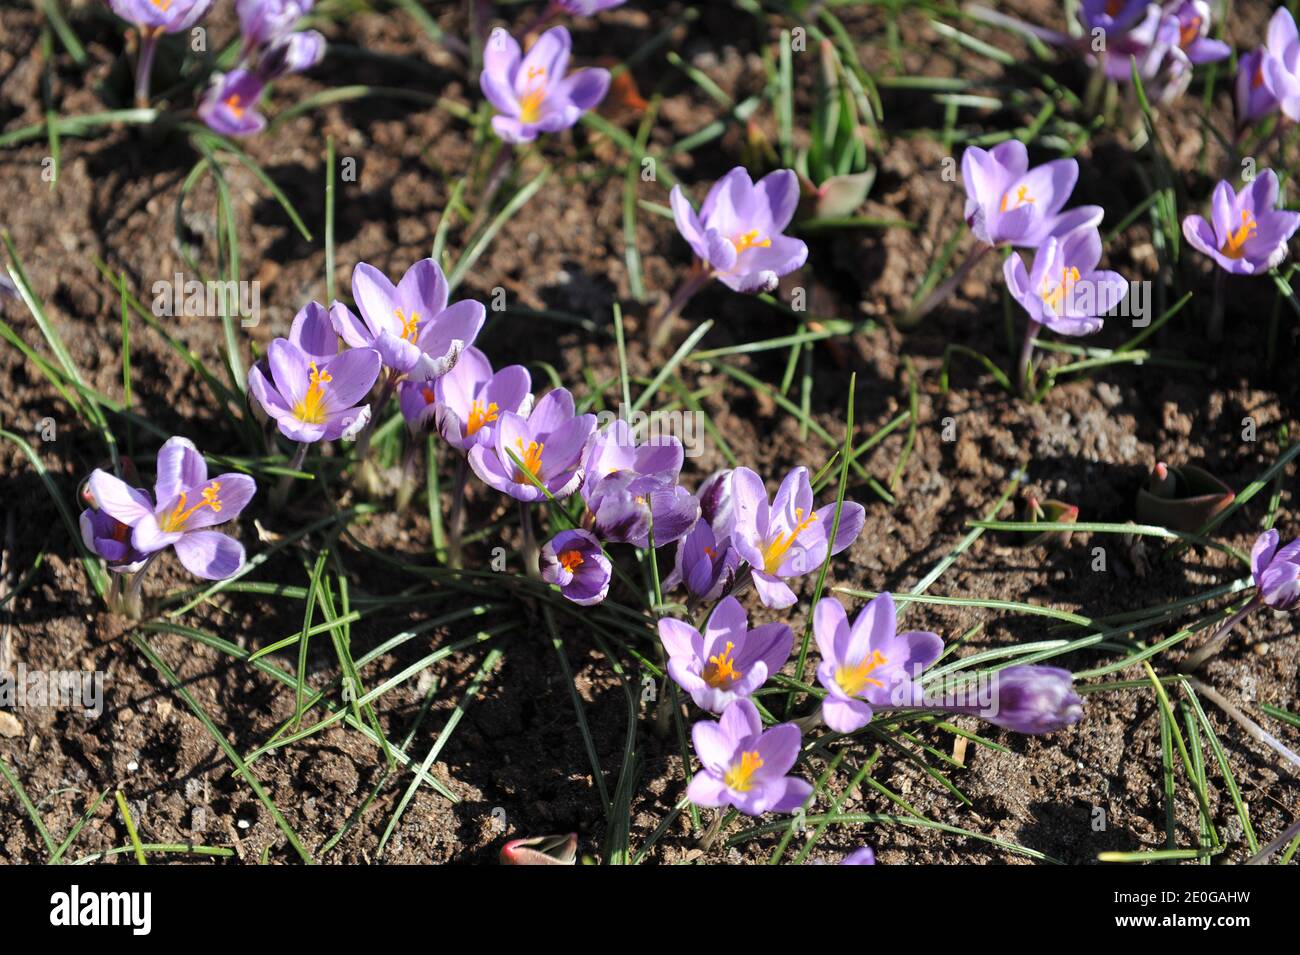 Violet Crocus minimus Spring Beauty bloom in a garden in April Stock Photo